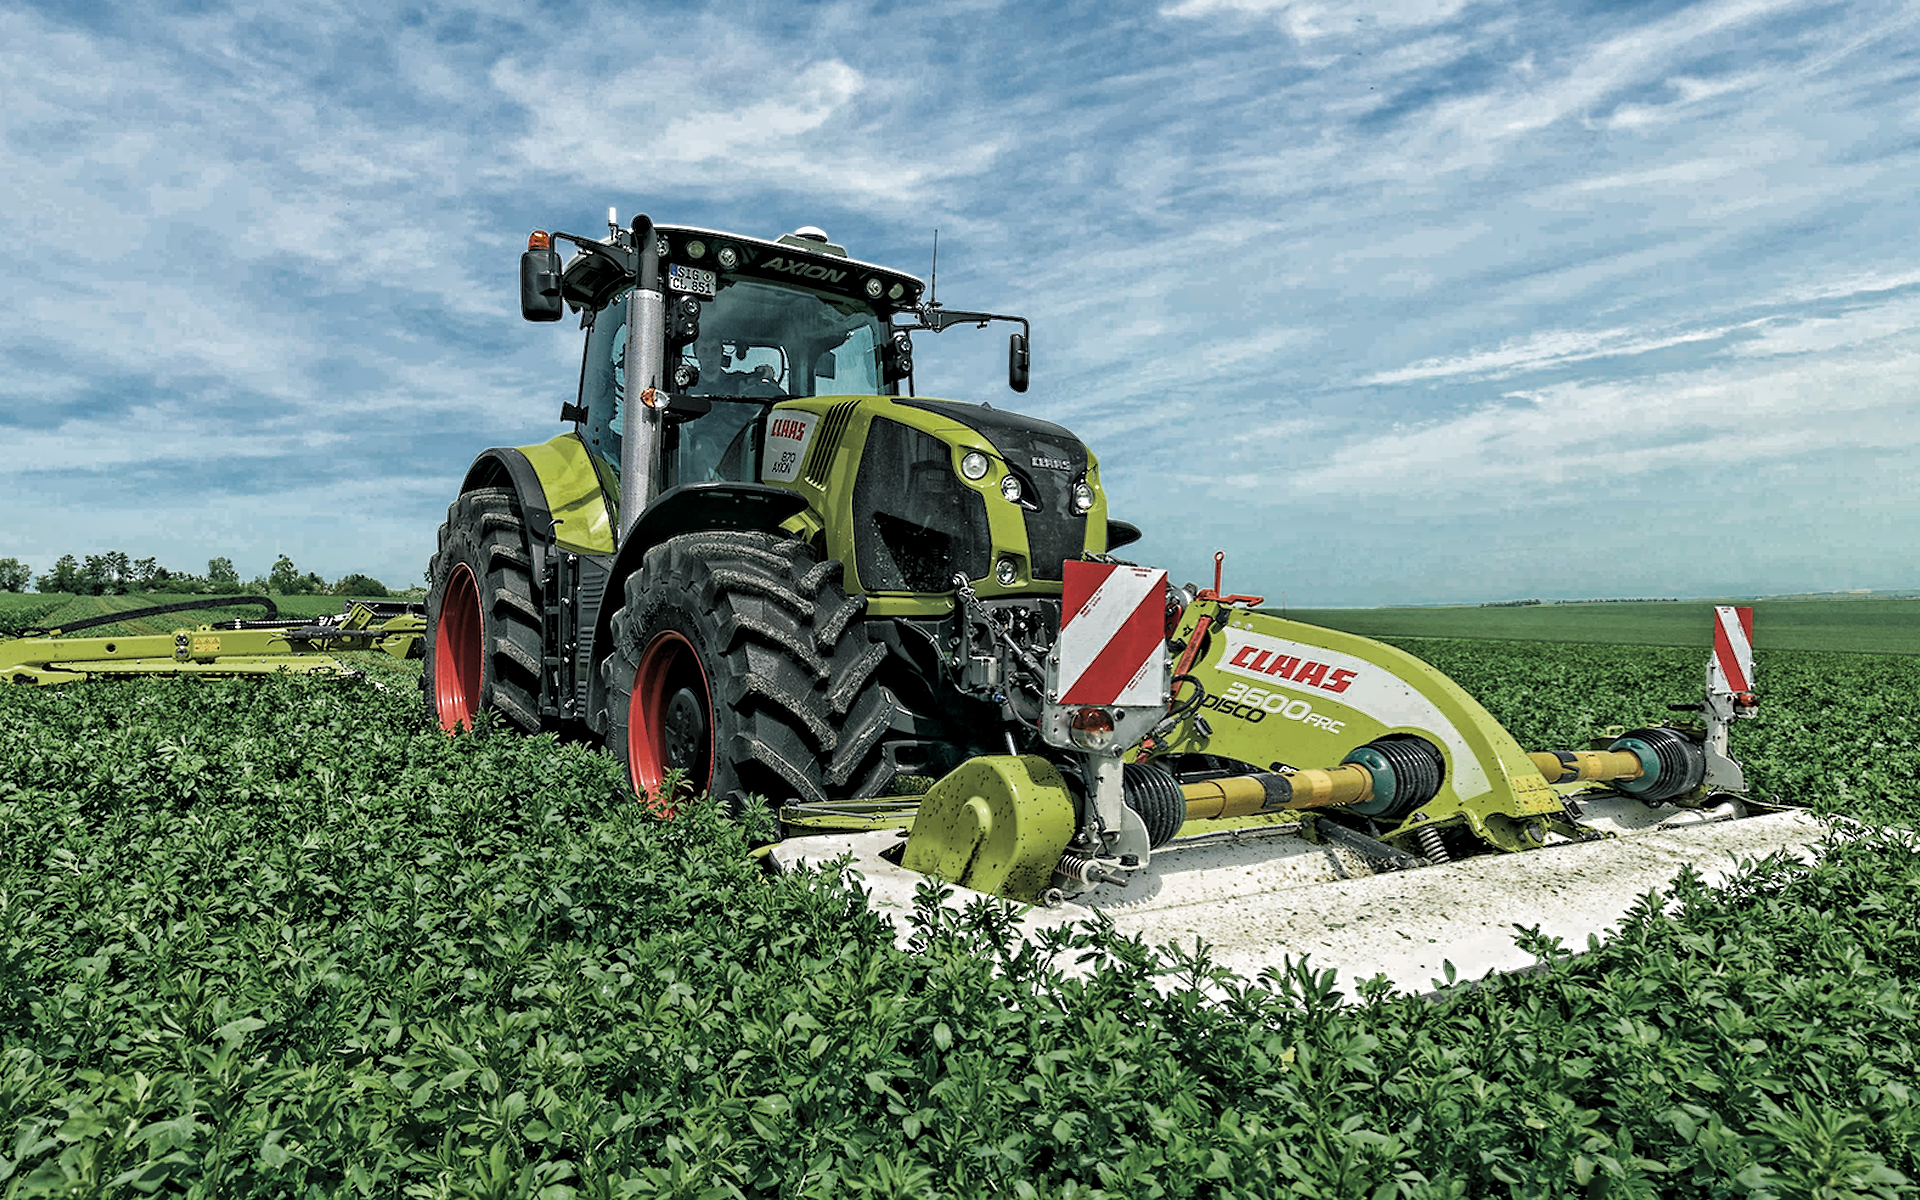 Download wallpaper CLAAS AXION new tractor, modern agricultural machinery, harvesting alfalfa, CLAAS, alfalfa field for desktop with resolution 1920x1200. High Quality HD picture wallpaper